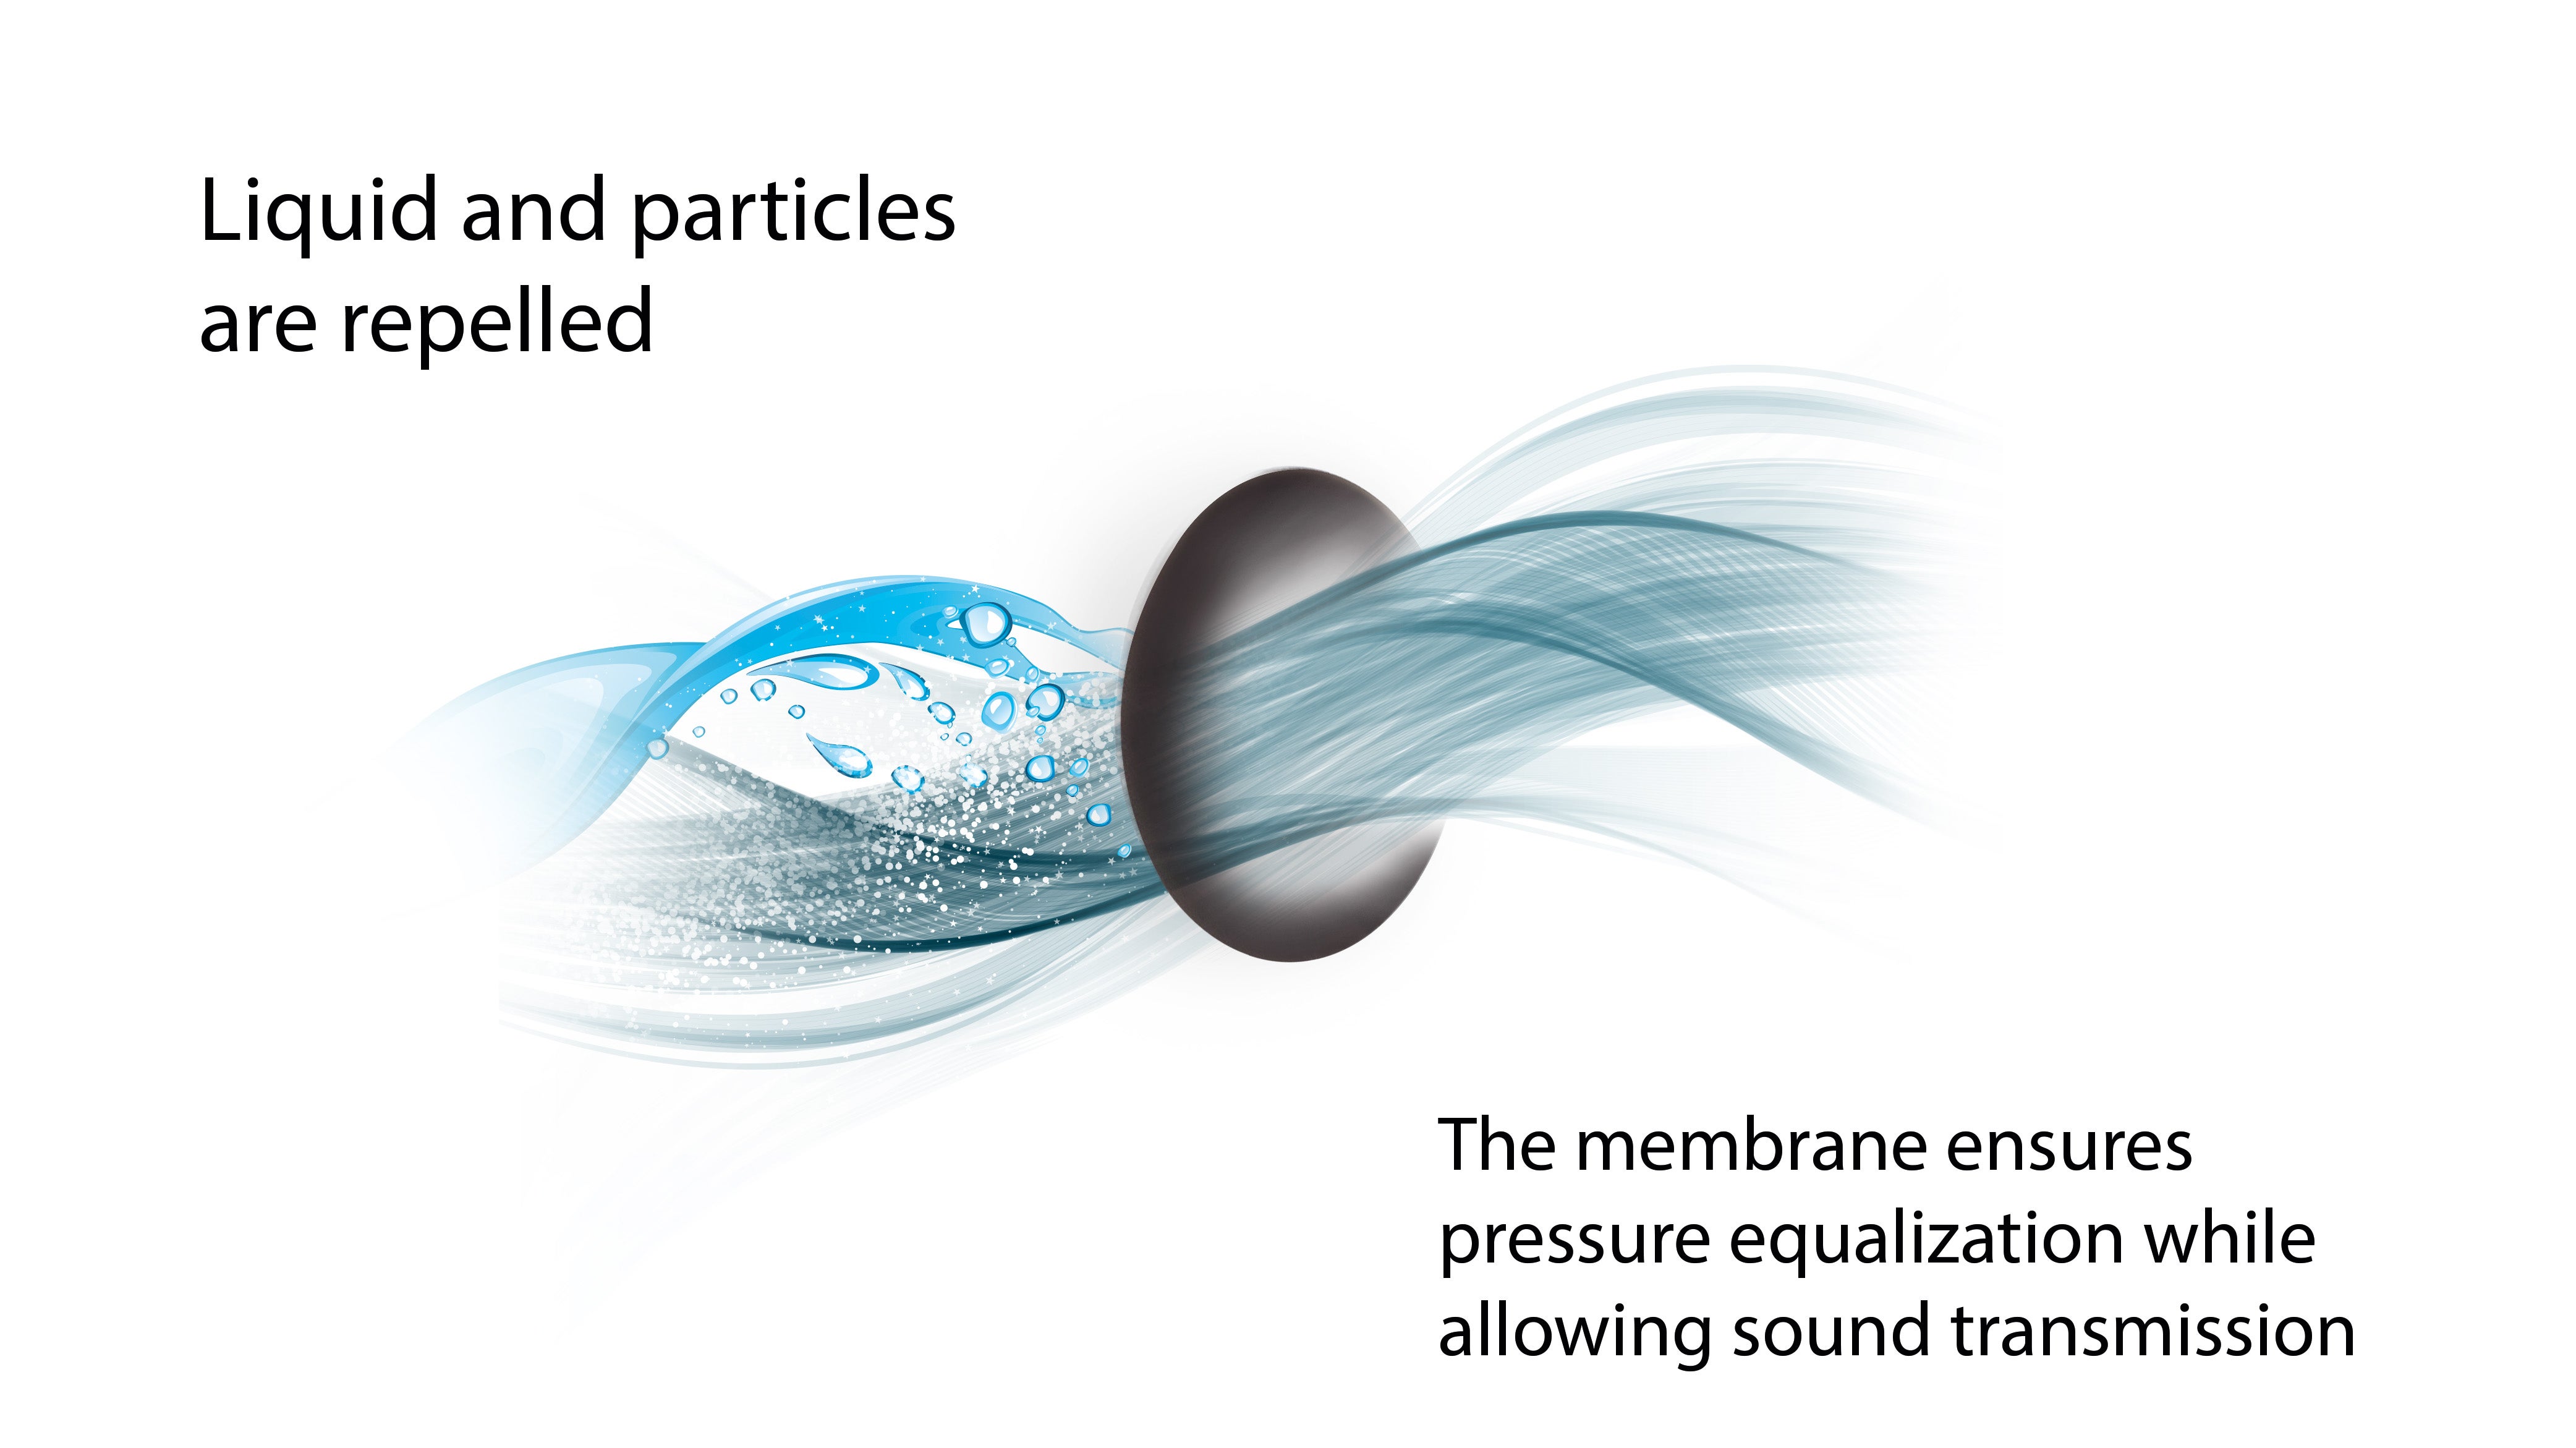 An acoustic membrane repels liquids and particles while enabling pressure equalization and clear sound transmission in outdoor industrial microphones